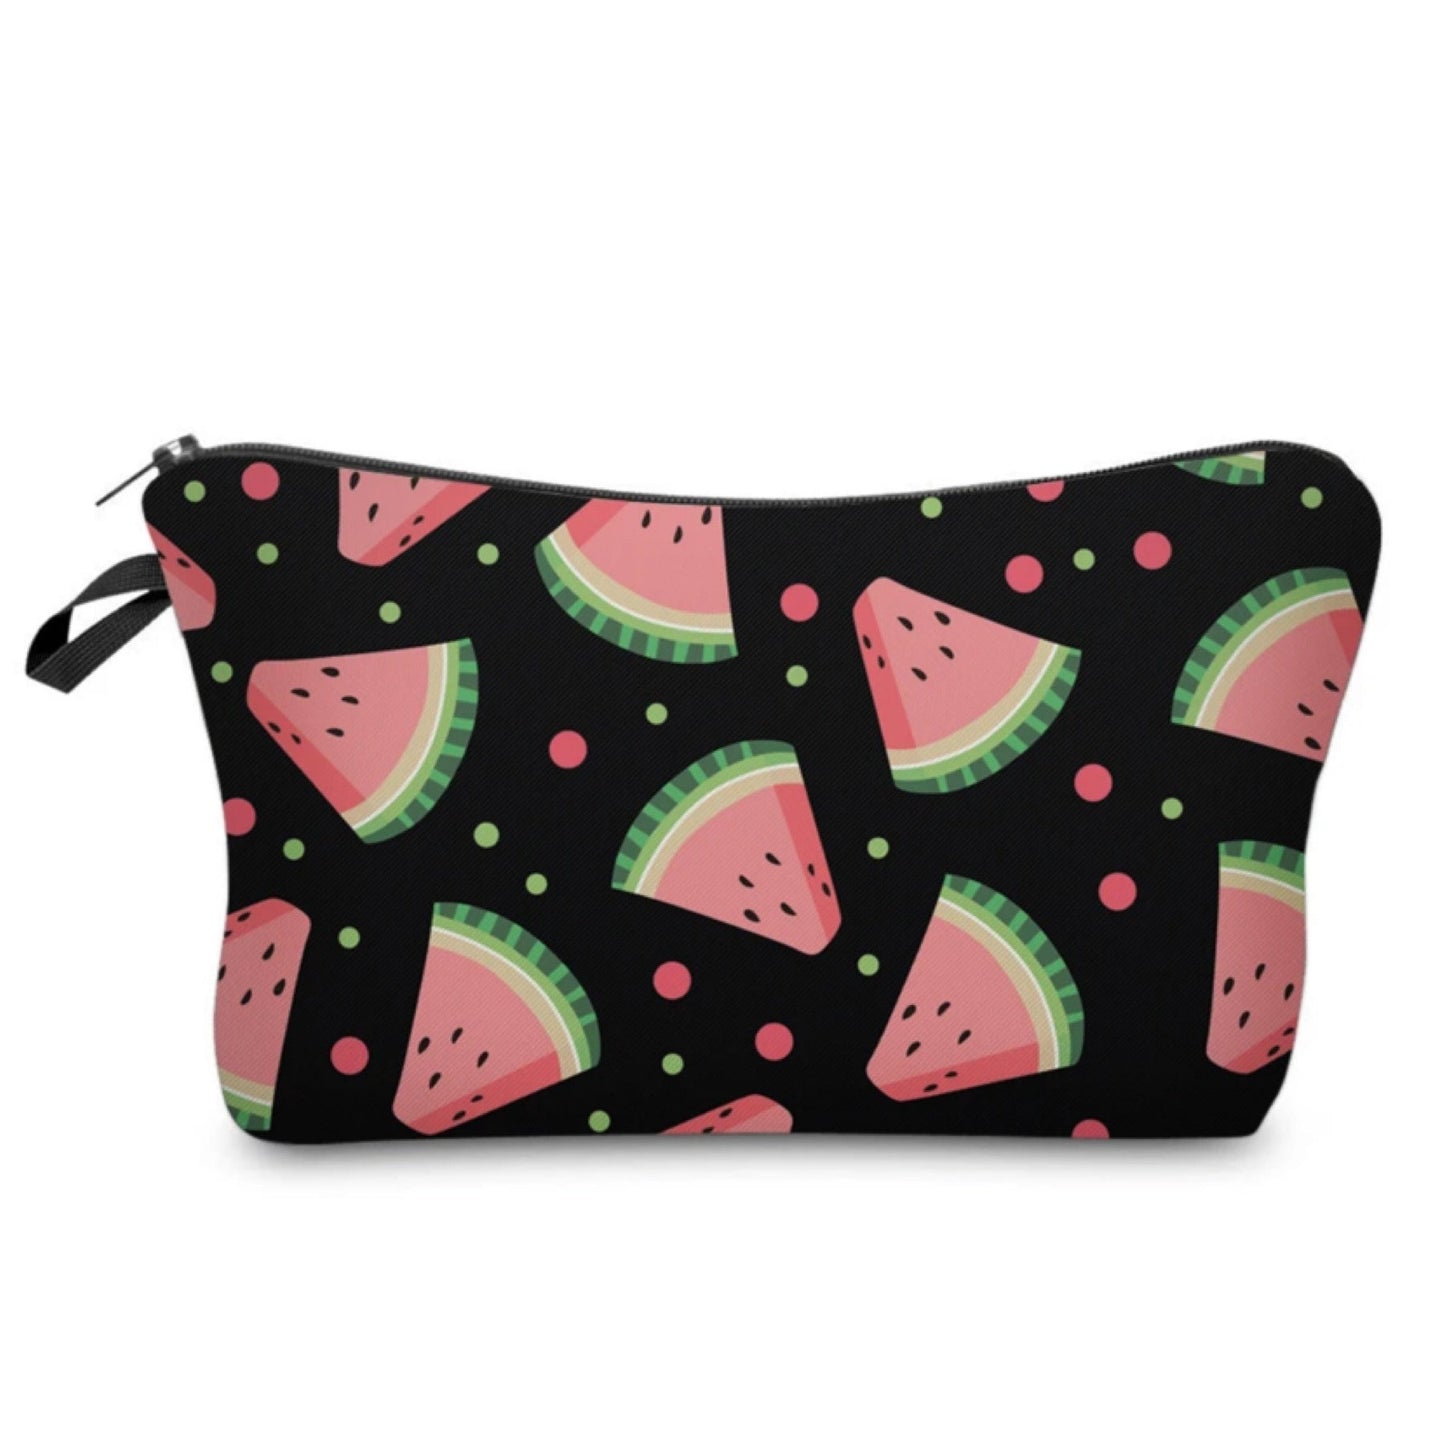 Watermelon Slices On Black - Water-Resistant Multi-Use Pouch